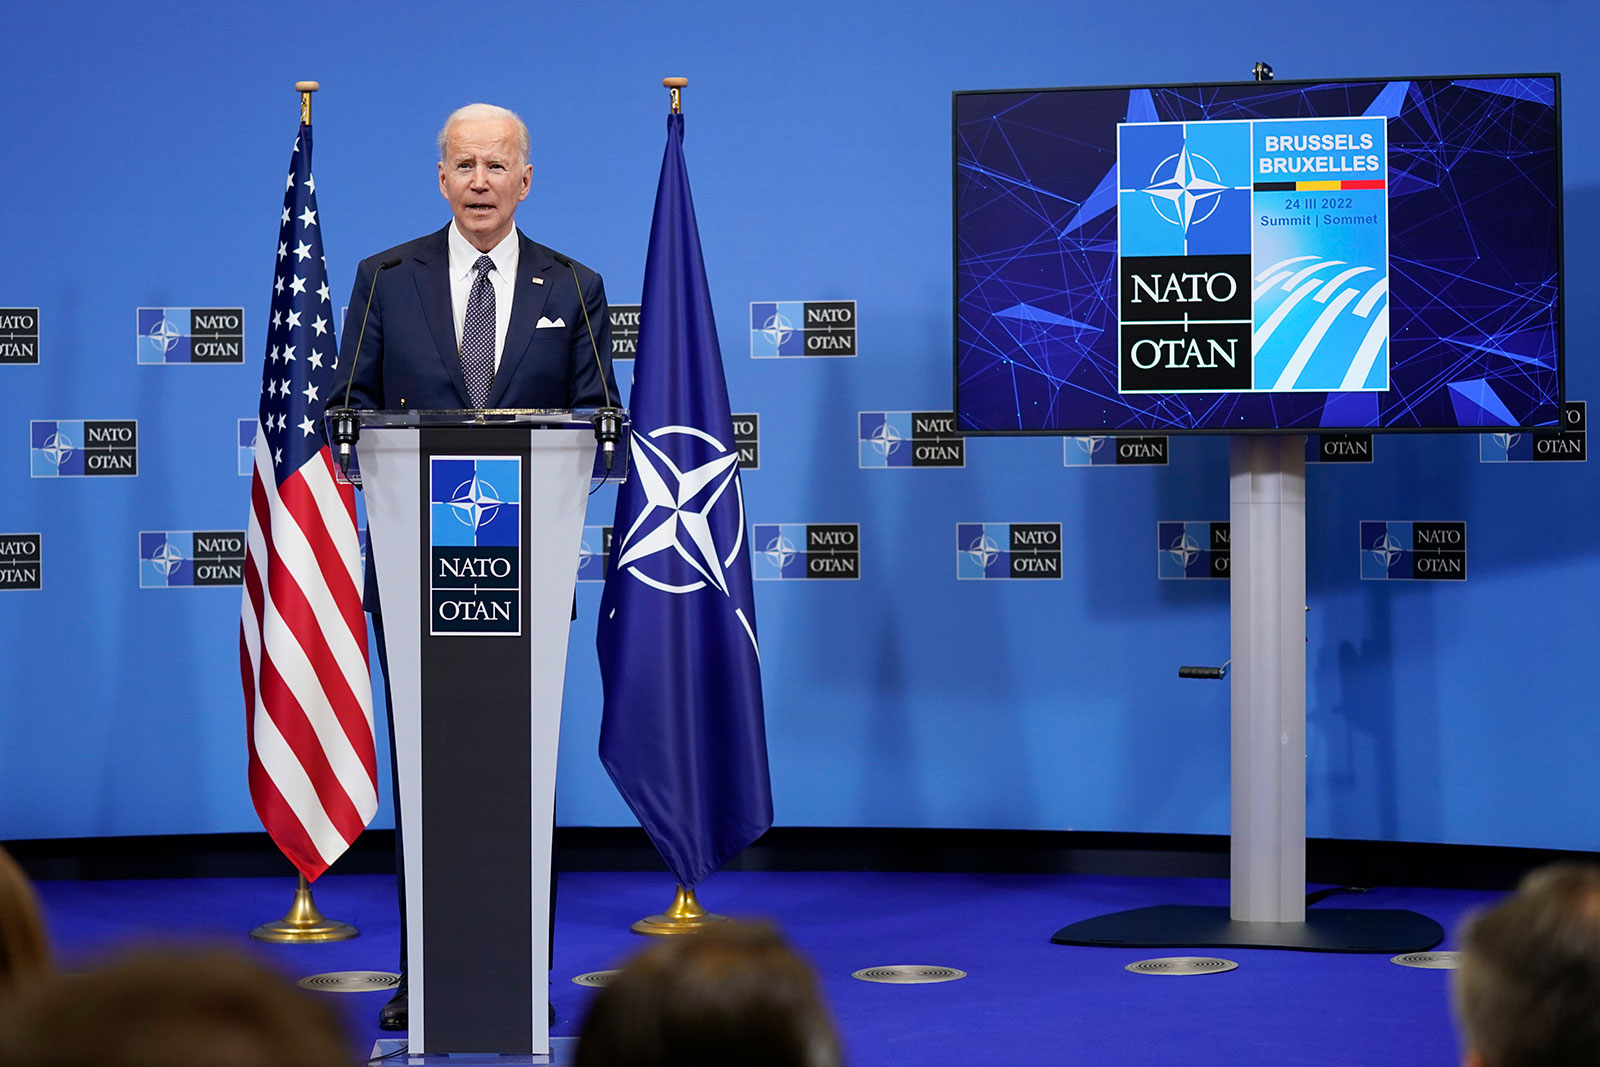 Biden: “We would respond” if Putin used chemical weapons